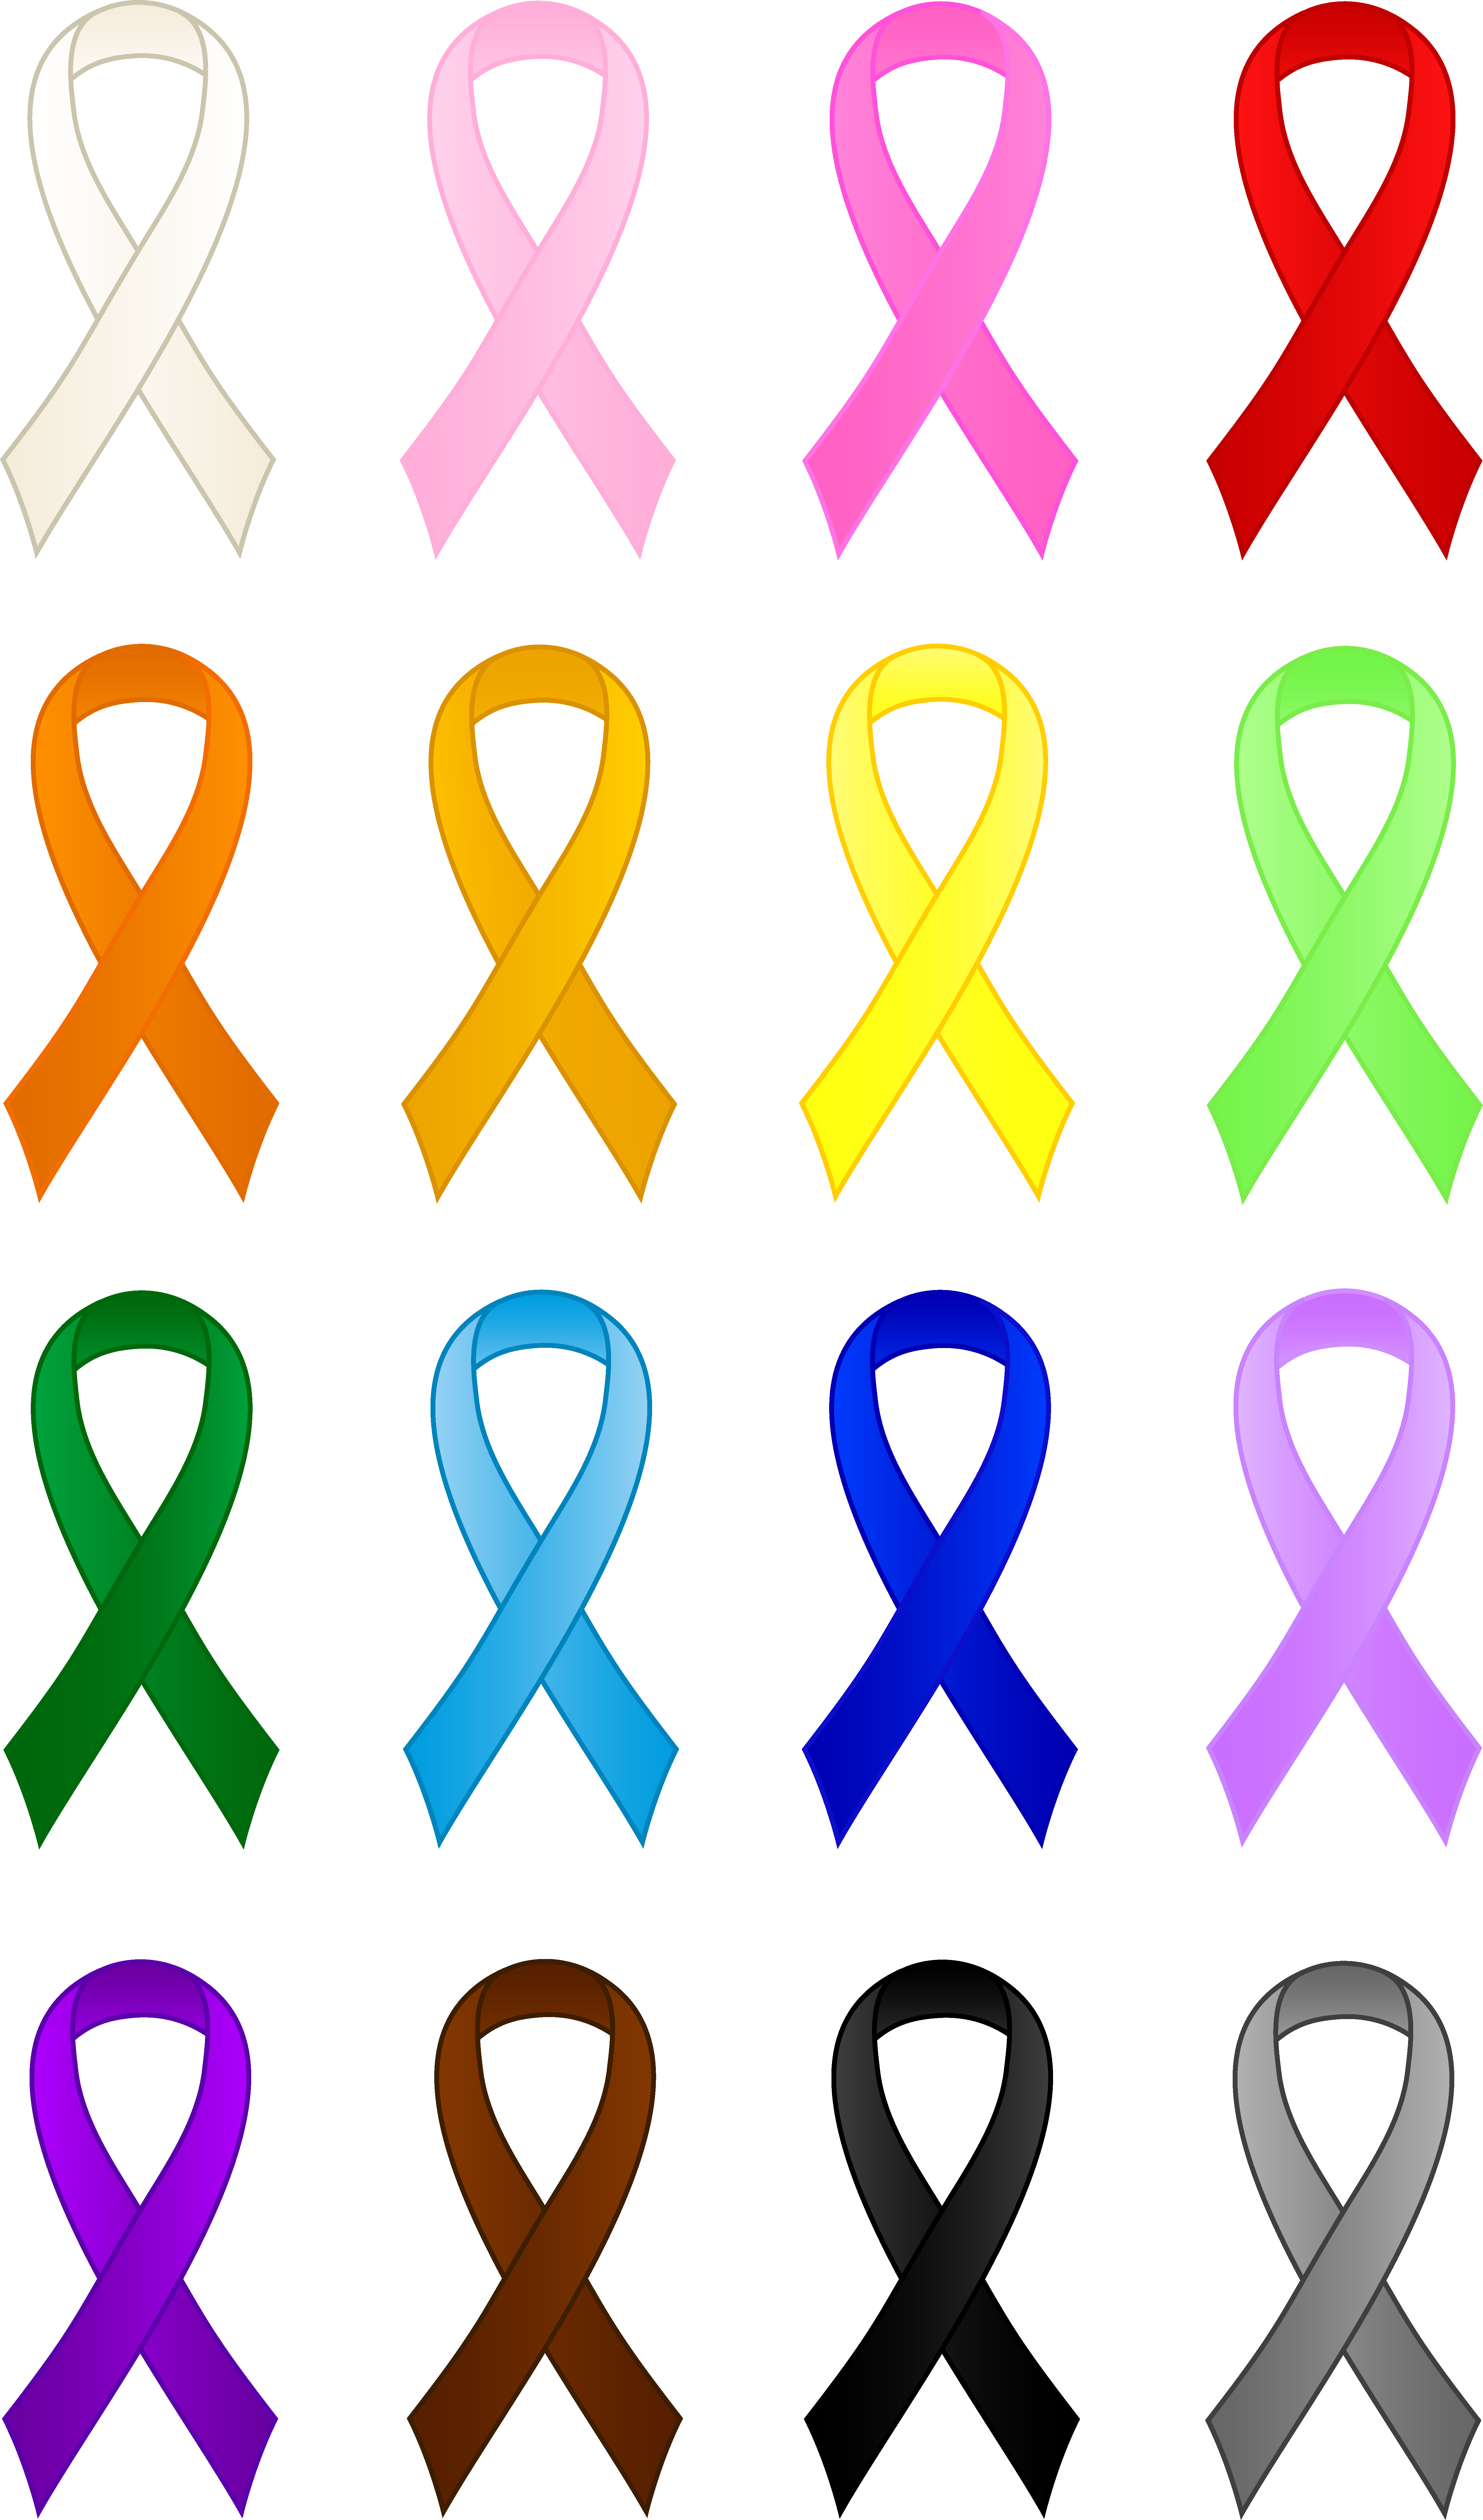 What color cancer is black?